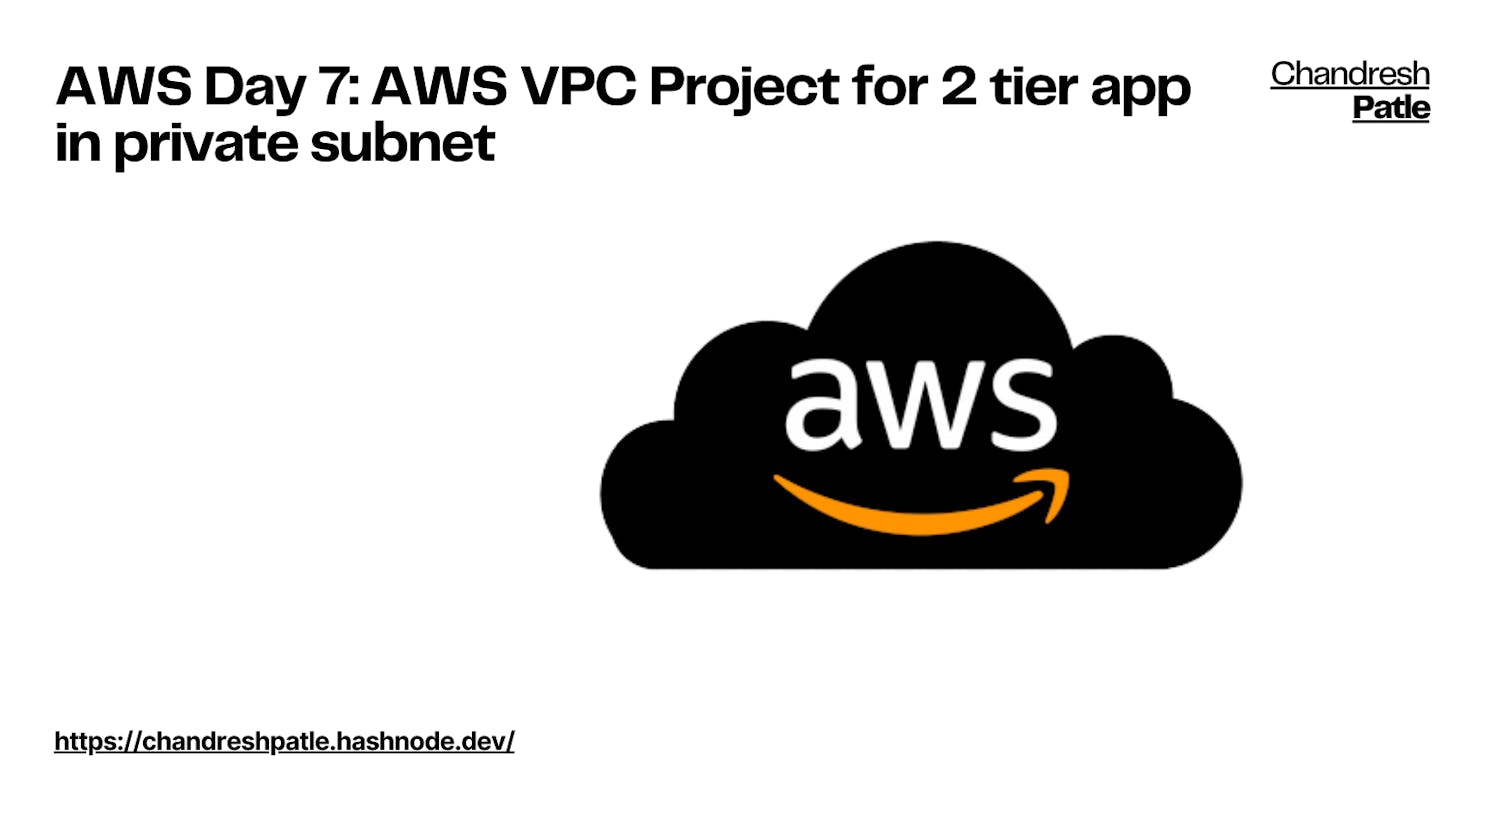 AWS Day 7: AWS VPC Project for 2 tier app in private subnet